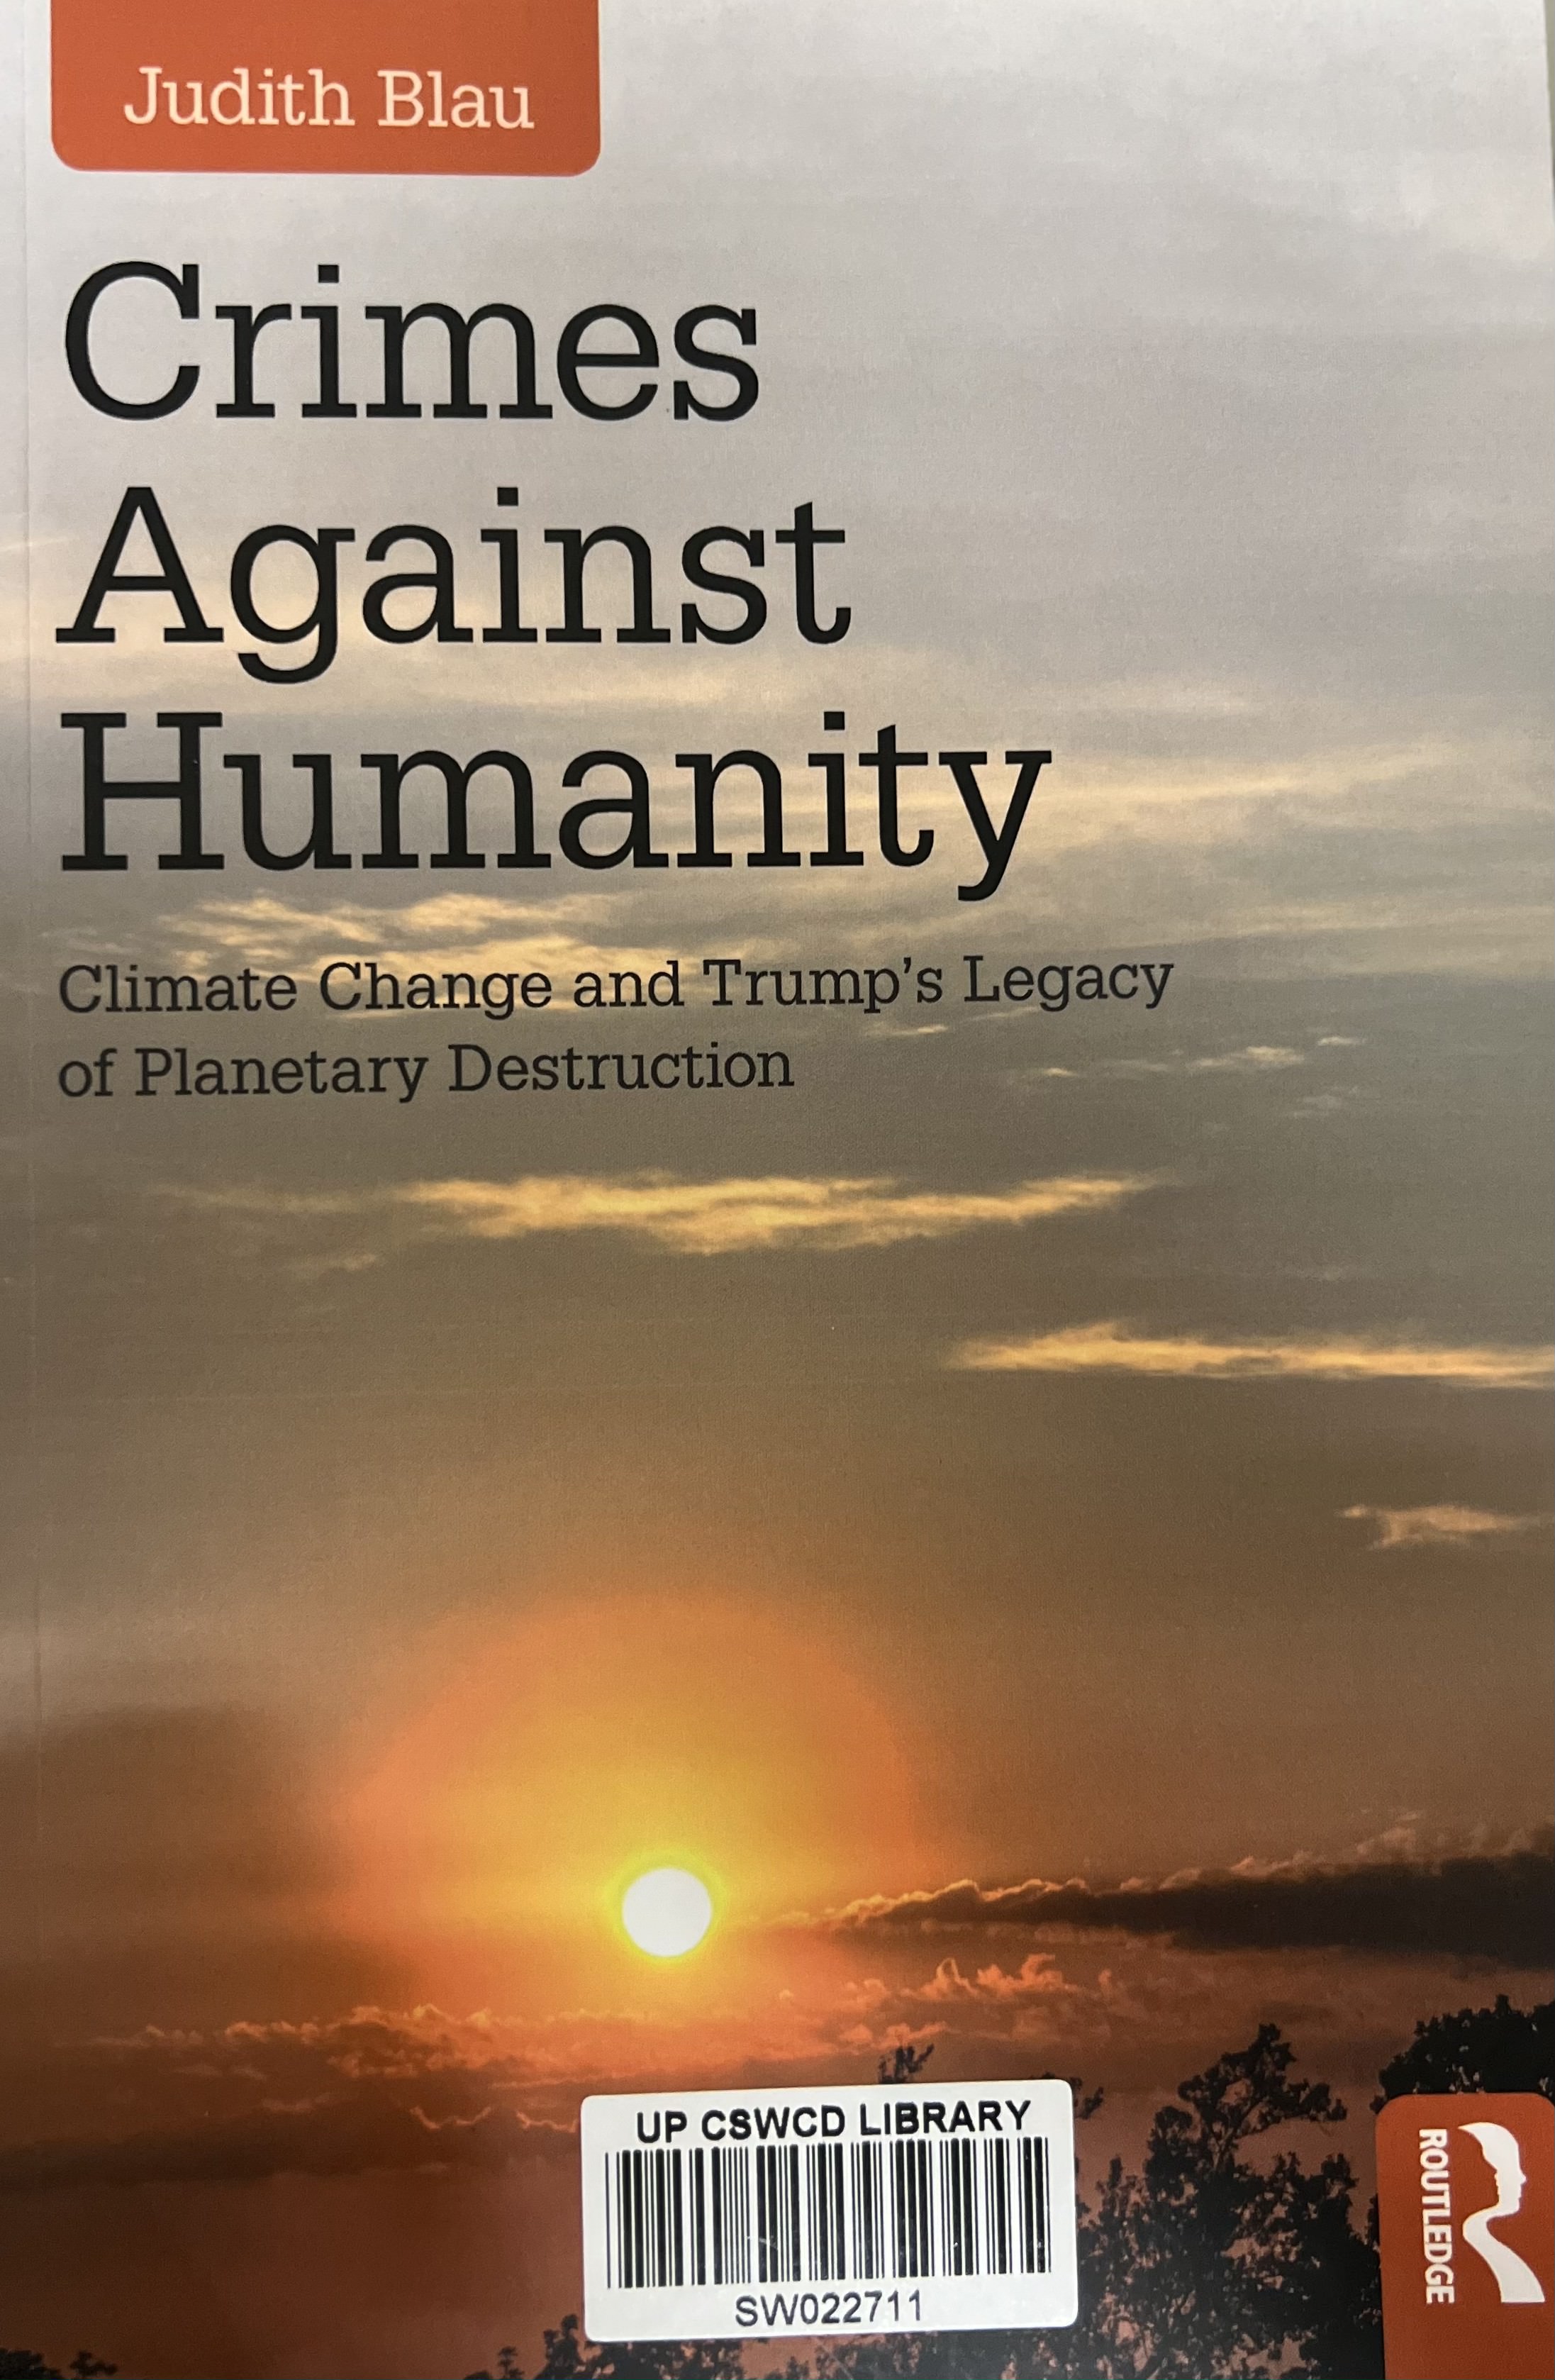 Crimes against humanity climate change and Trump's legacy of planetary destruction